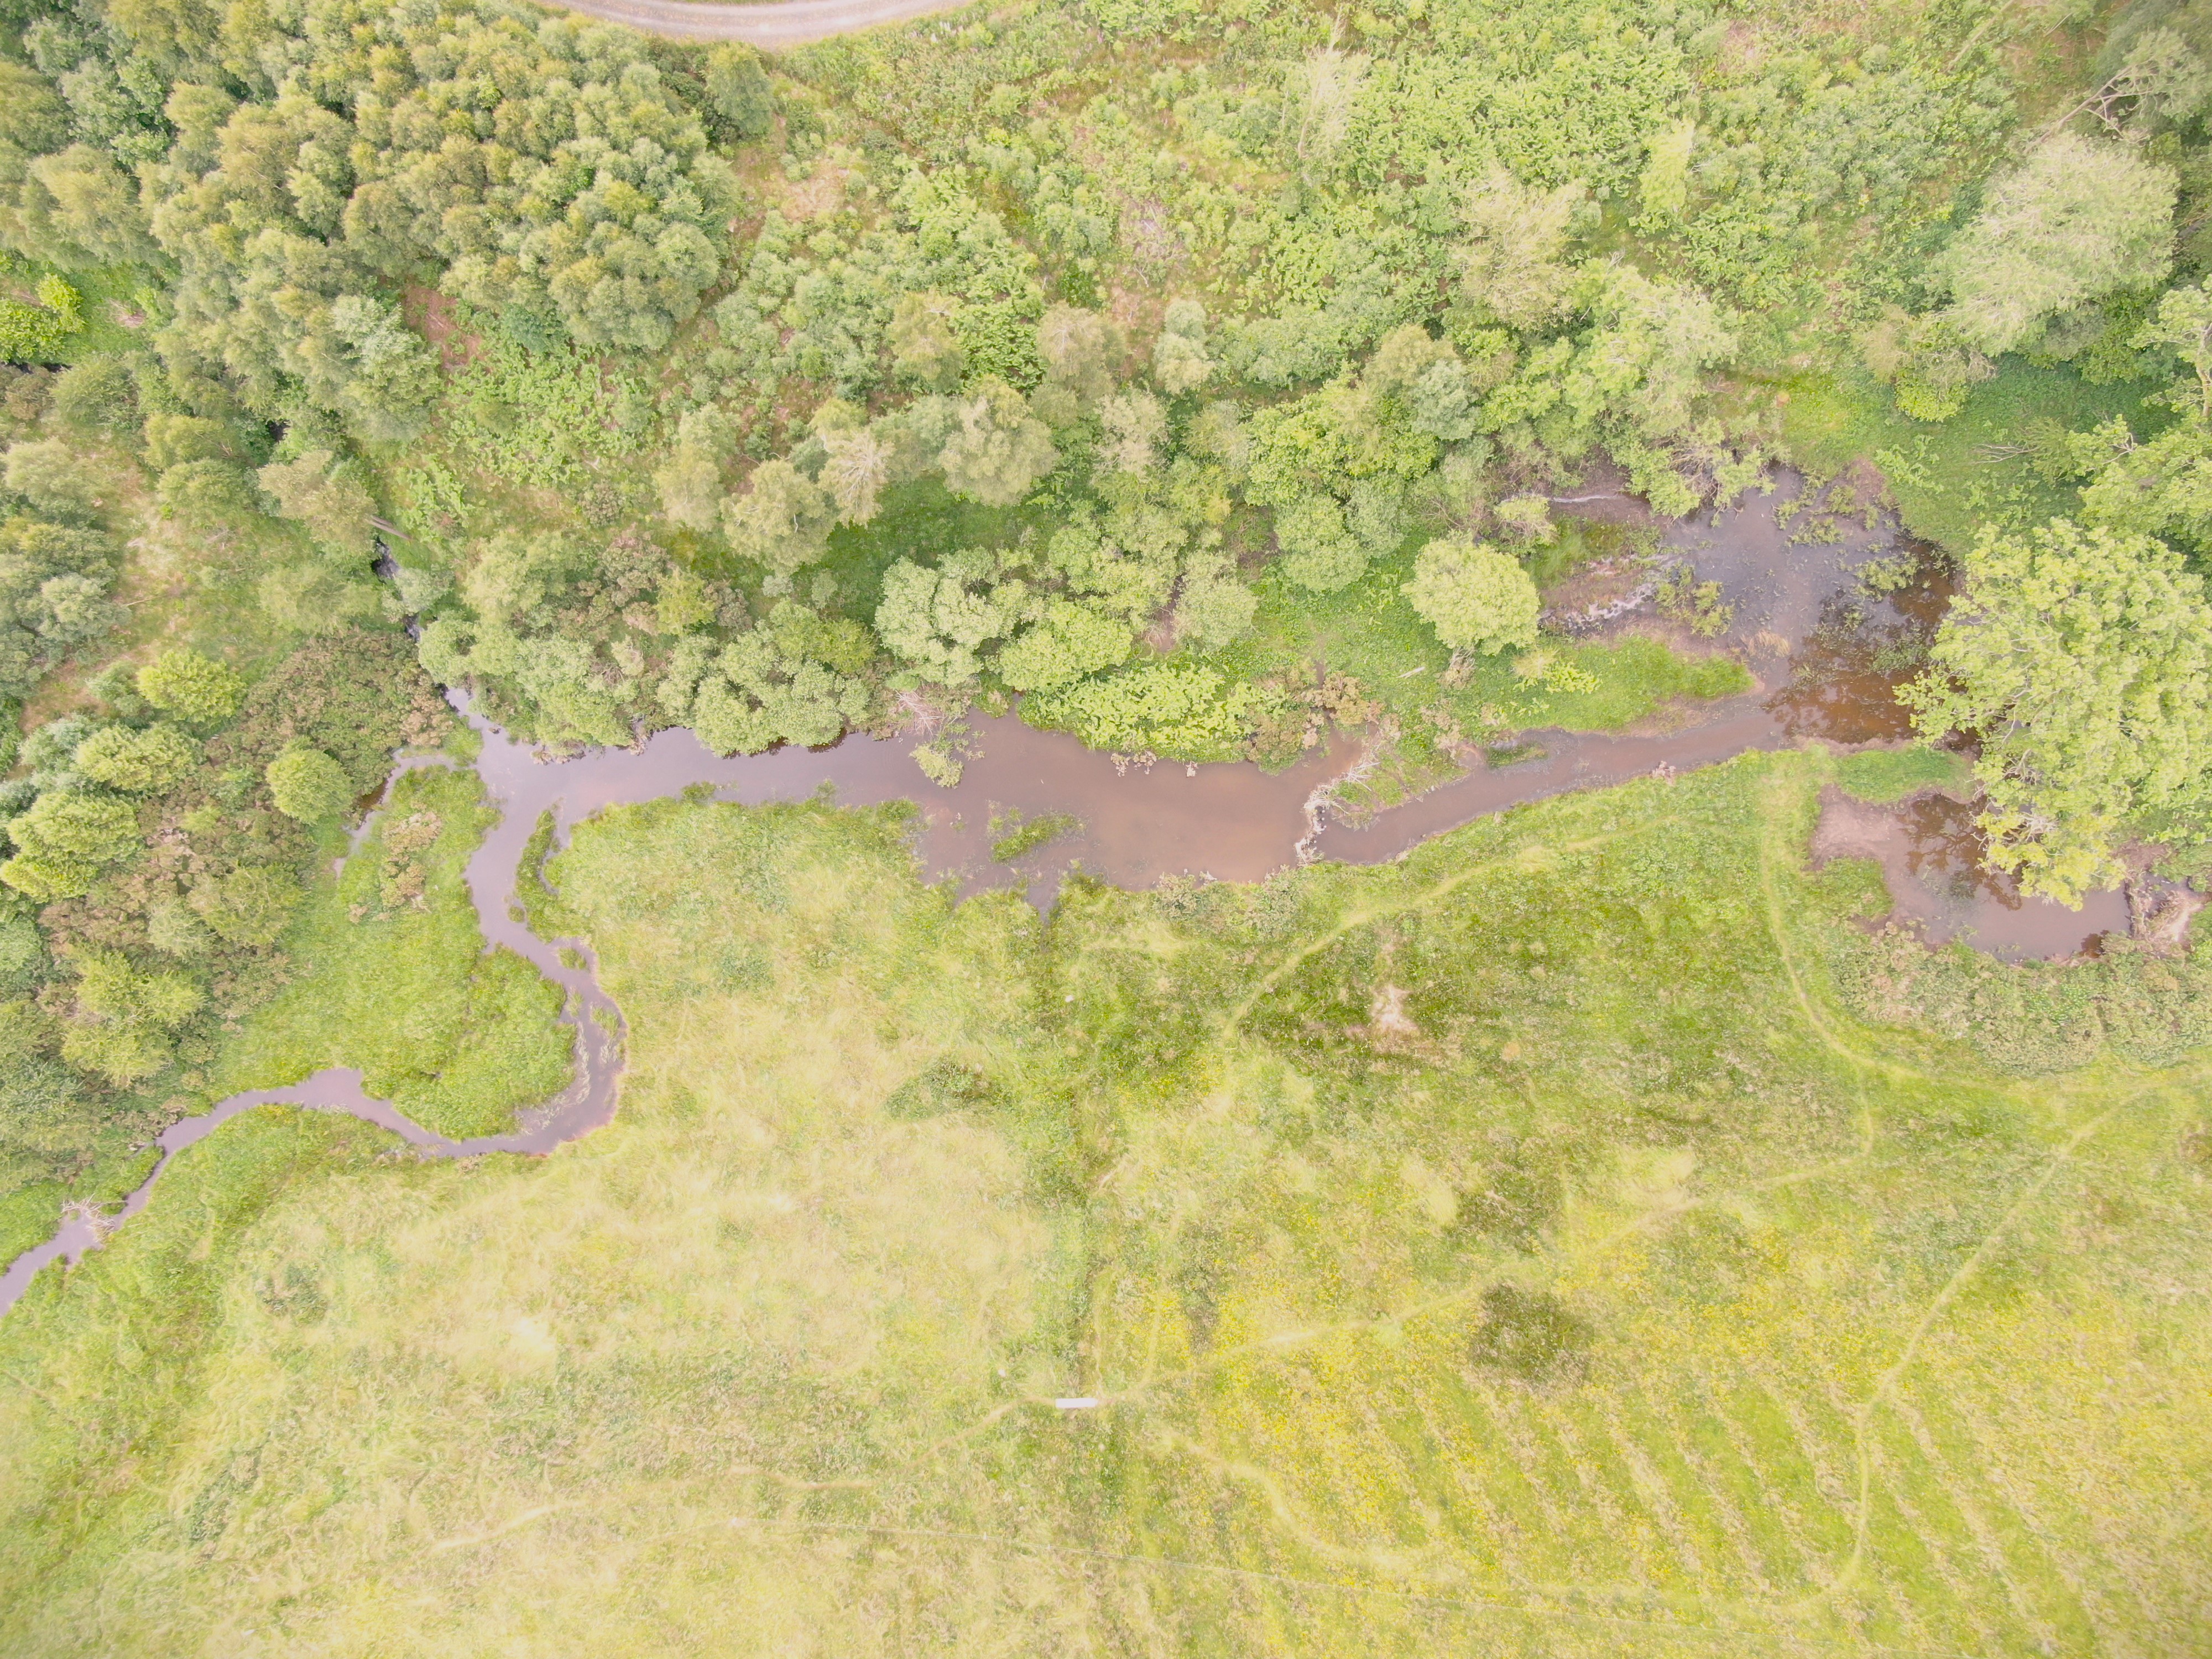 Drone footage of the enclosure after the beavers where released